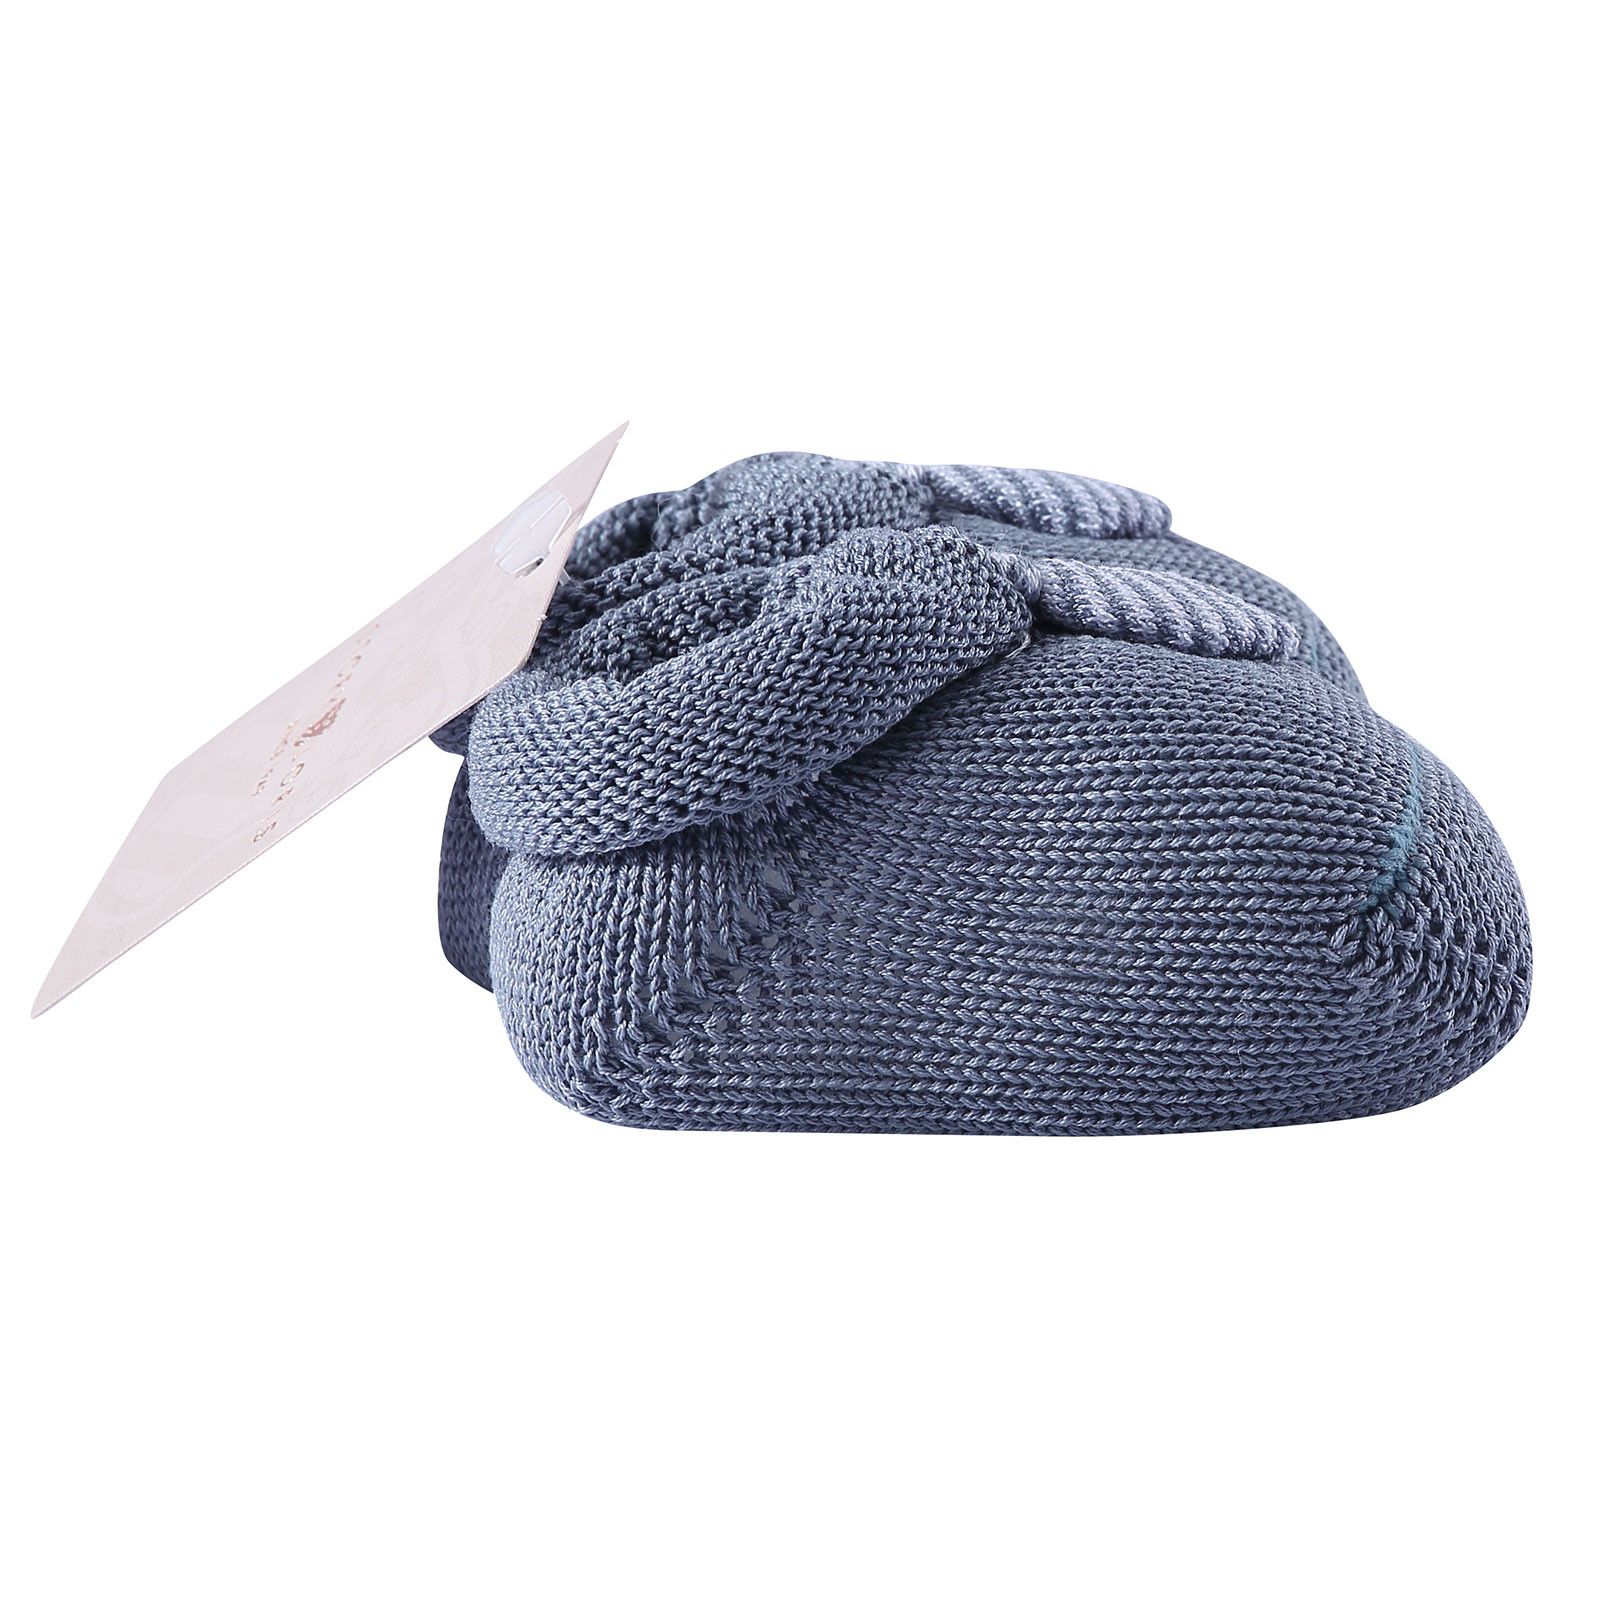 Baby Grey Knitted Cotton Shoes With Blue Tie Trims - CÉMAROSE | Children's Fashion Store - 3